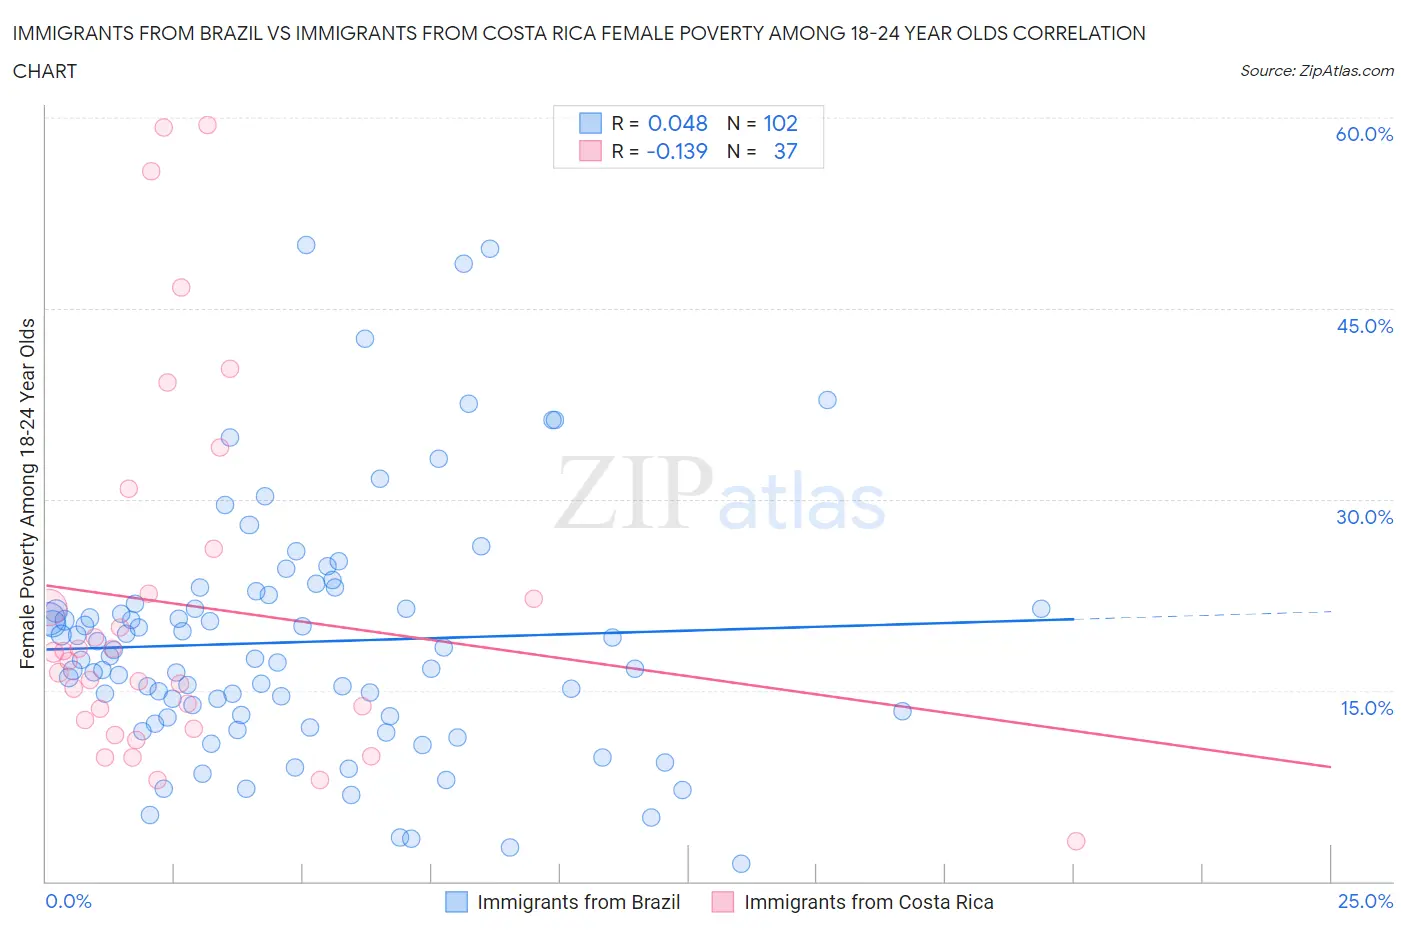 Immigrants from Brazil vs Immigrants from Costa Rica Female Poverty Among 18-24 Year Olds